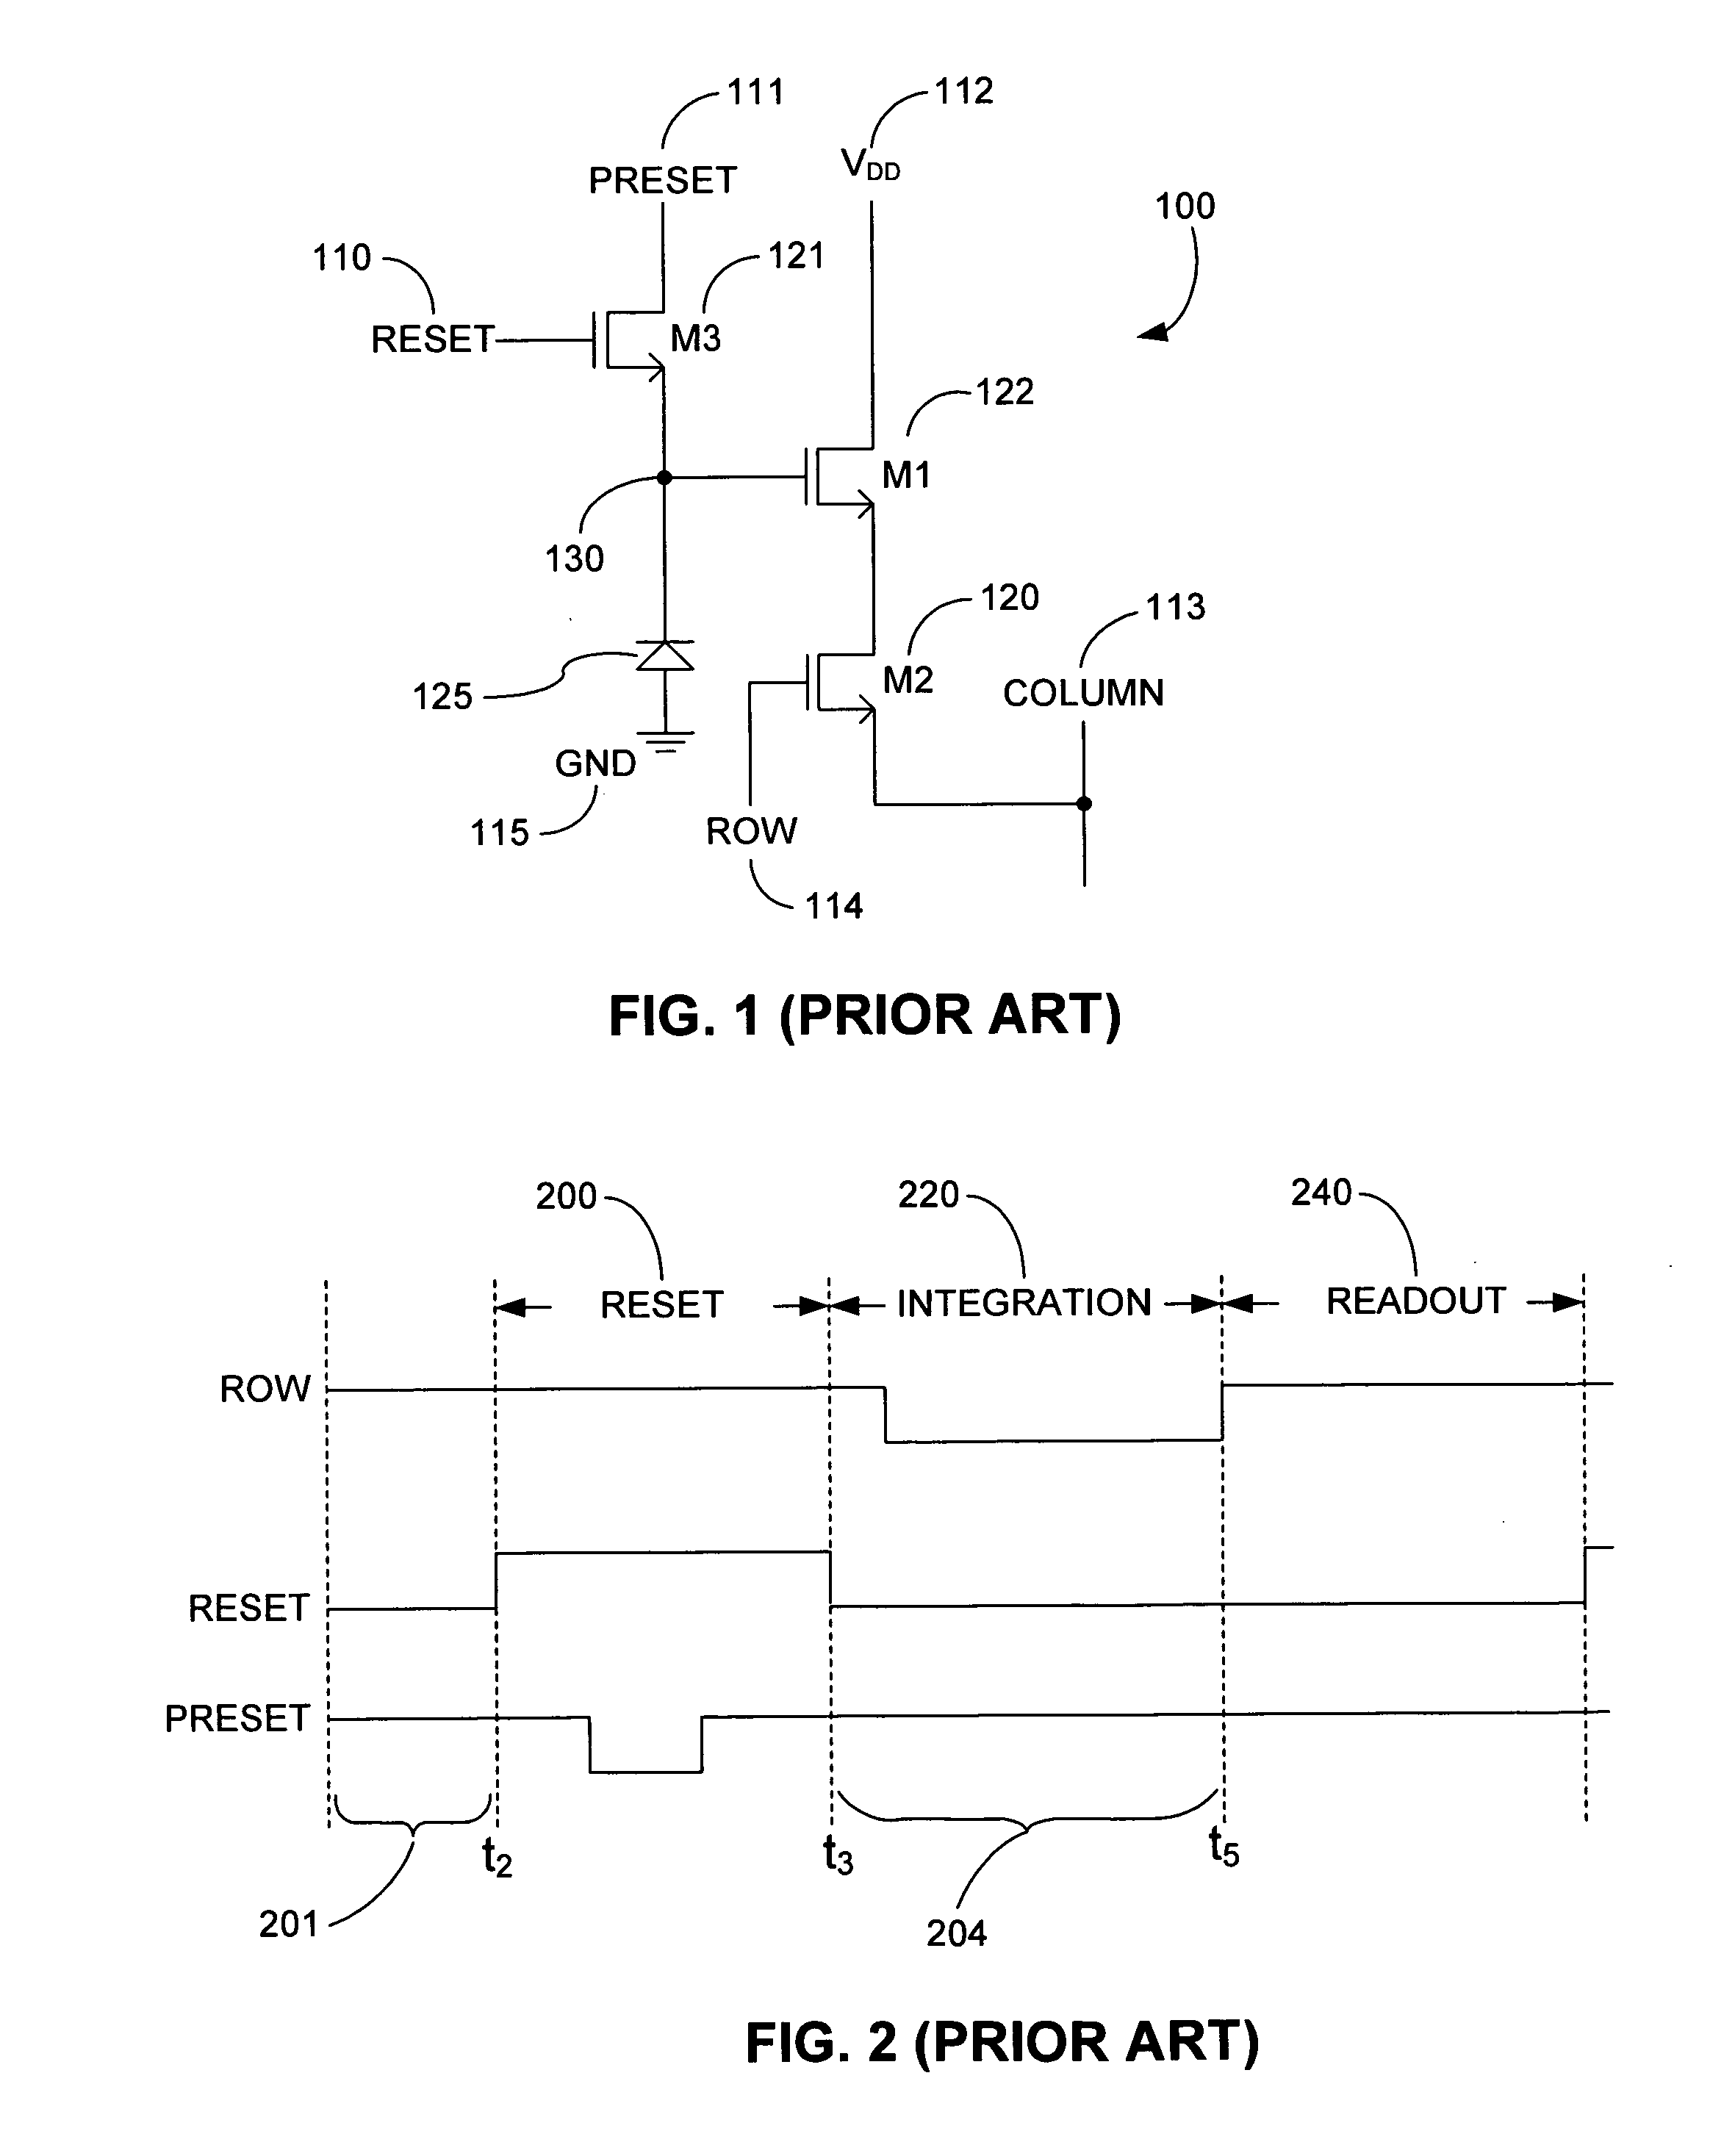 Fissile material detector having an array of active pixel sensors